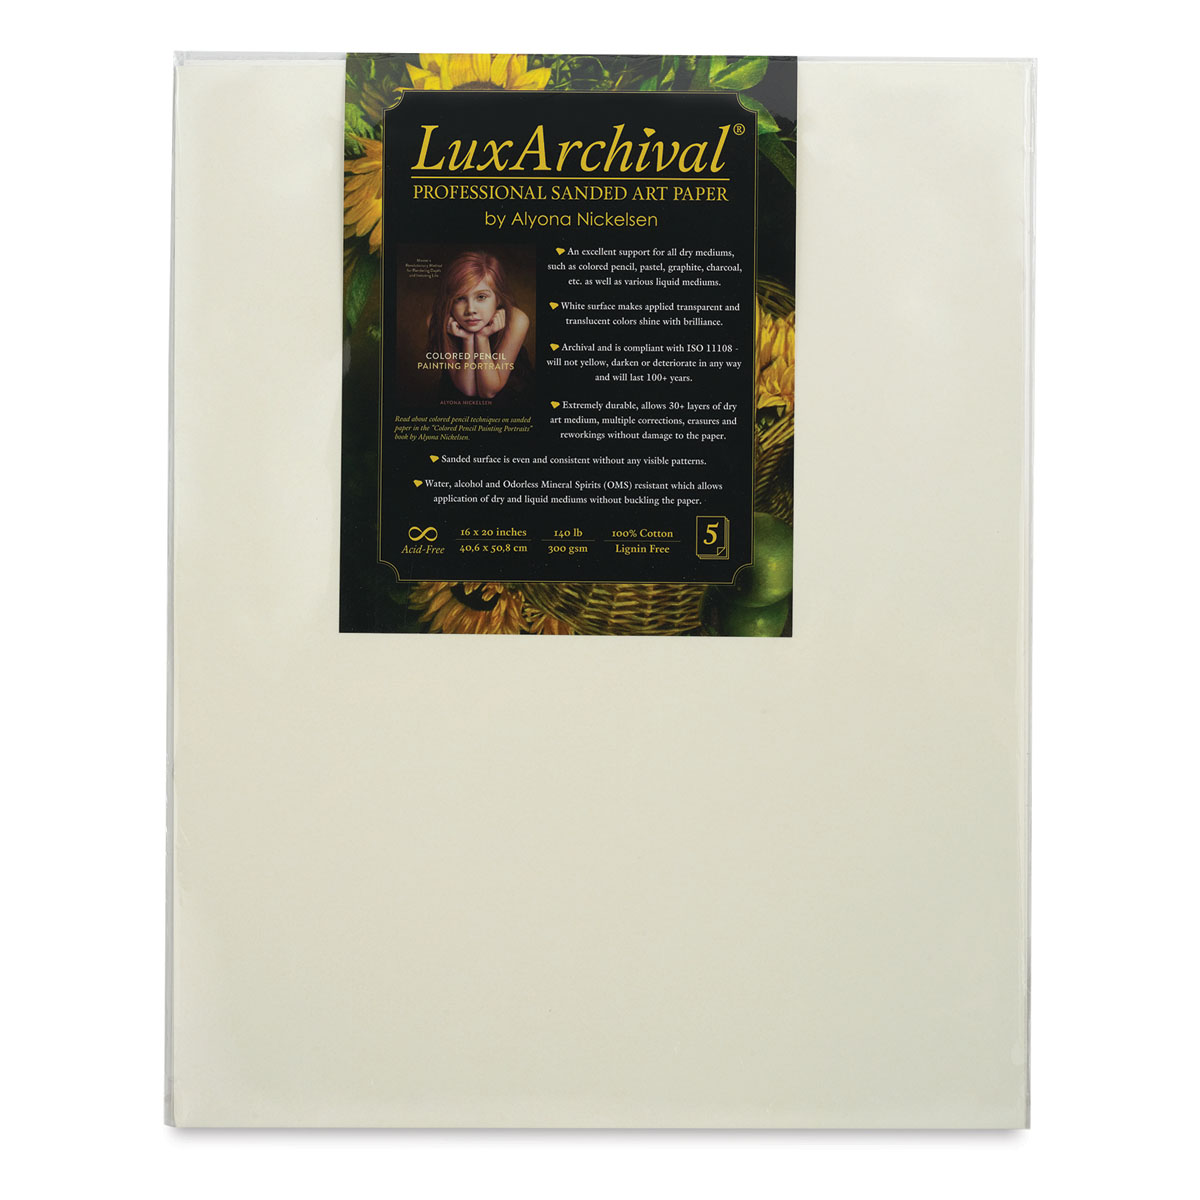 LuxArchival : Professional Sanded Art Paper : 400 Grit : 48inx5yd Roll